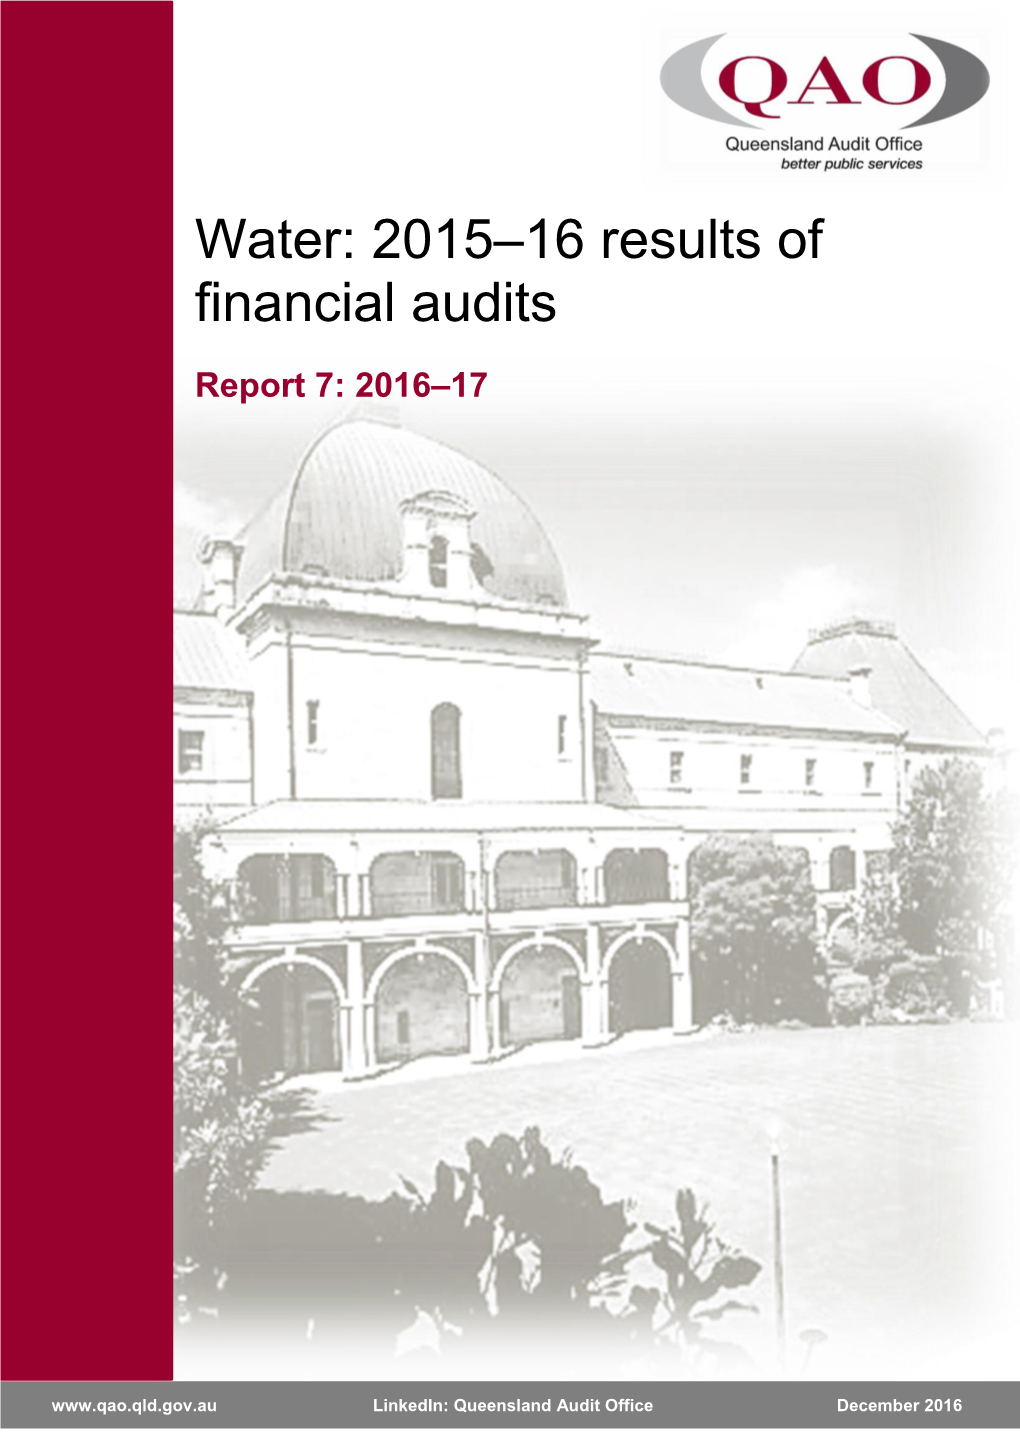 Water: 2015–16 Results of Financial Audits